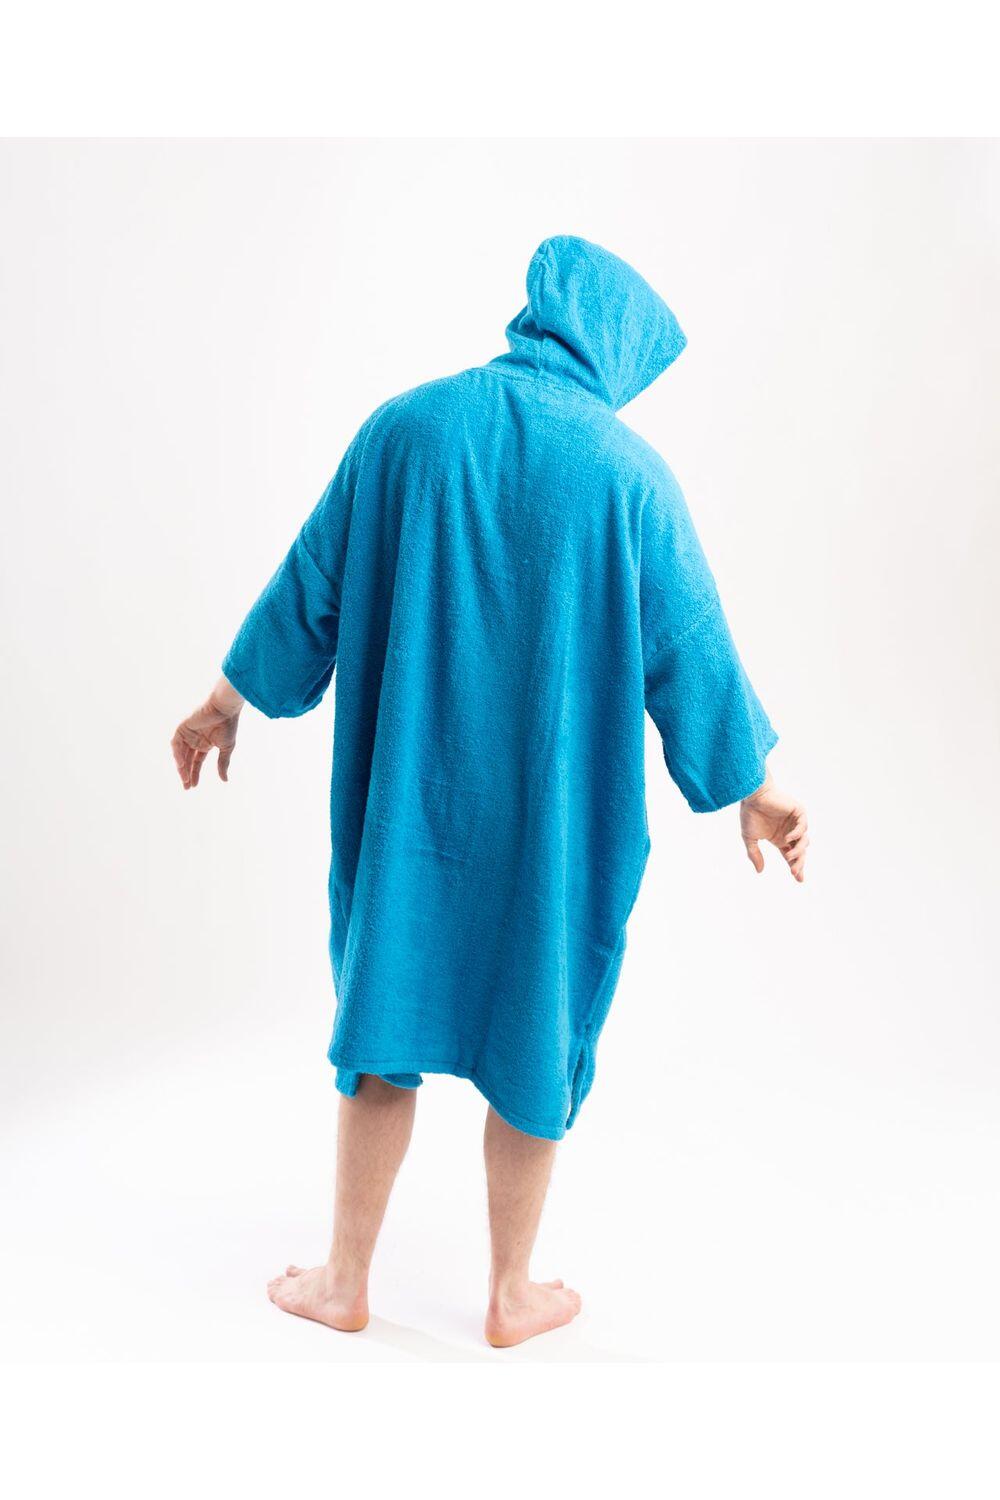 Adults Hooded Change Robe - Blue 2/7